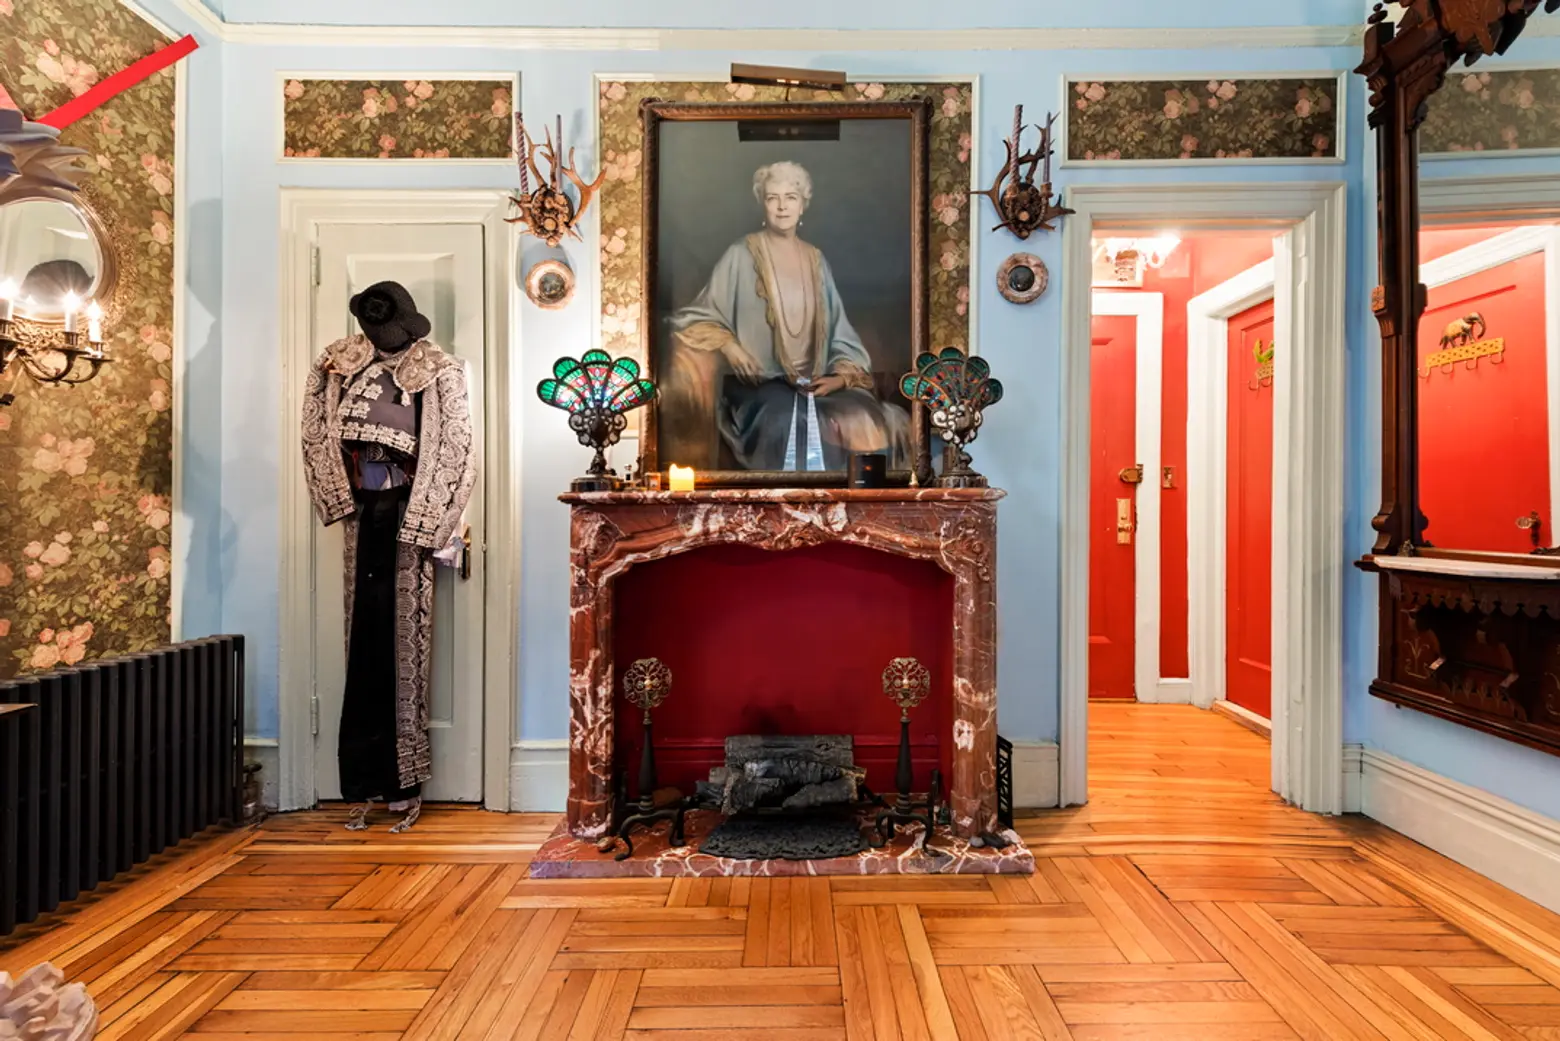 Rufus Wainwright is selling his Gramercy Park pied-a-terre for $450K